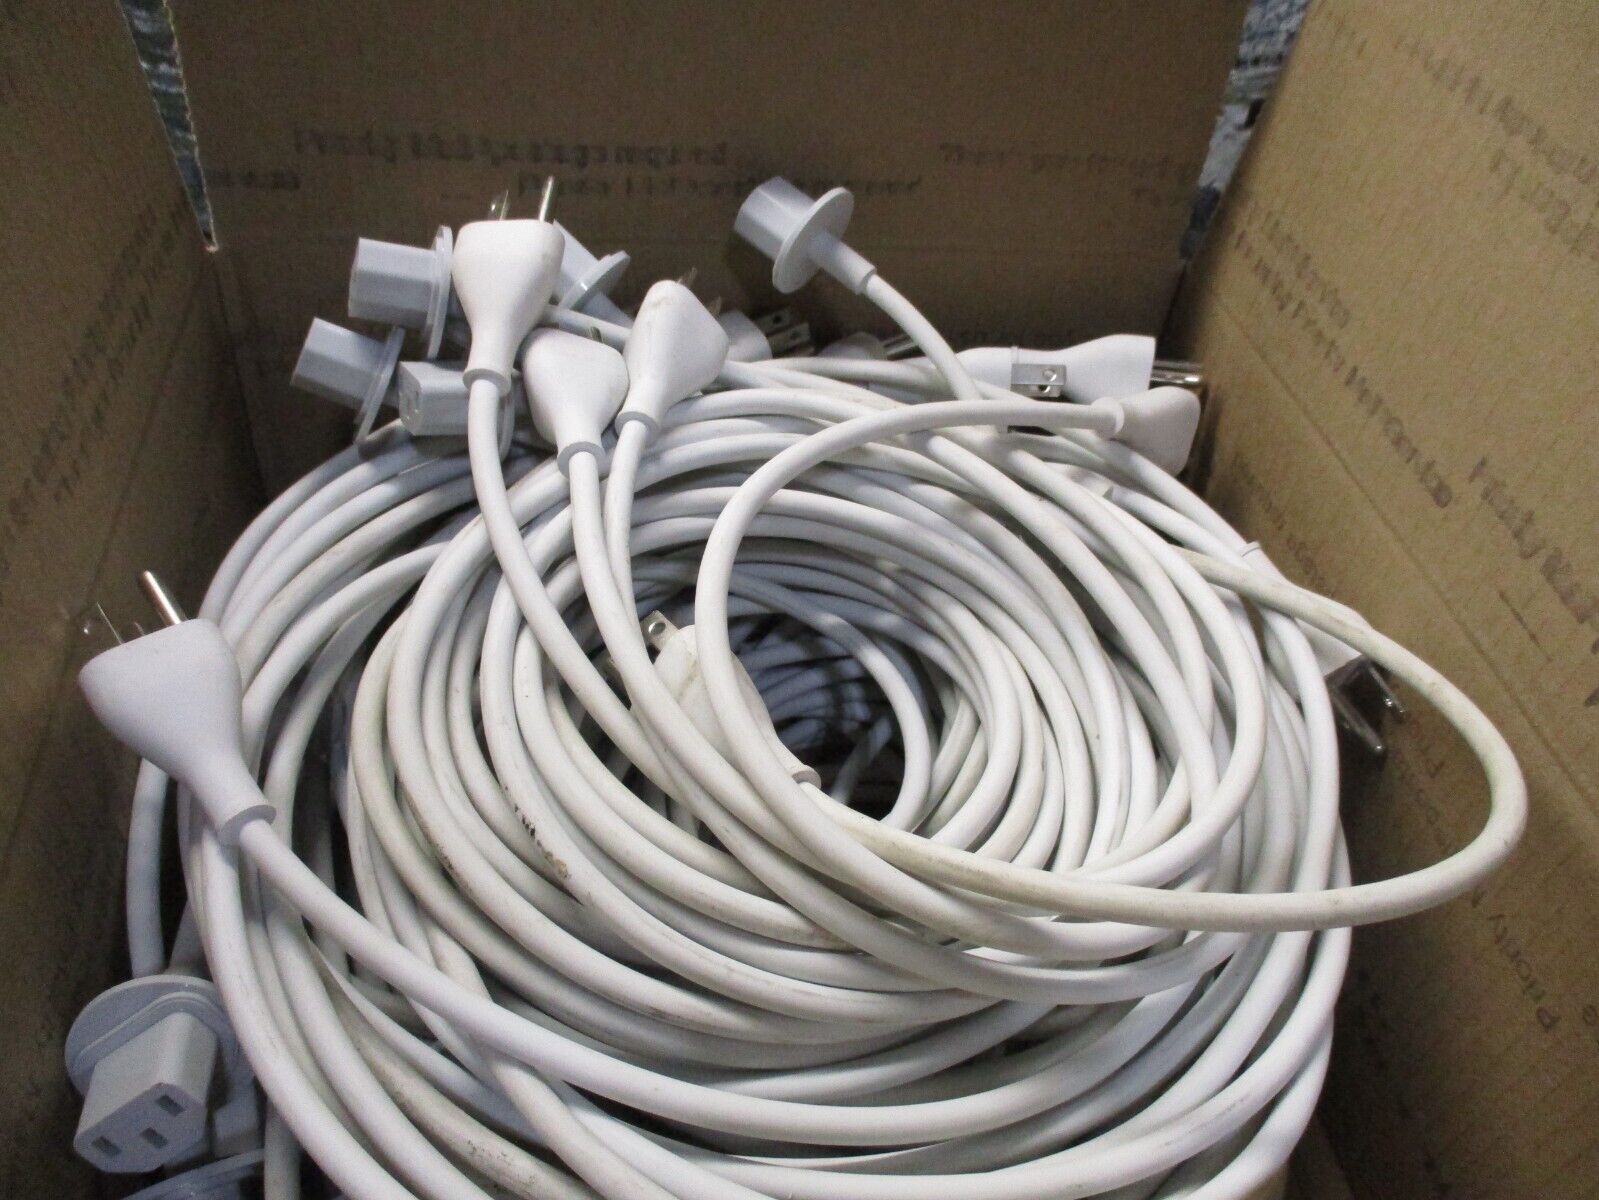 Genuine OEM 2006 - 2011 Apple iMac 6ft Power Cord Cable 622-0153 USED LOT OF 30